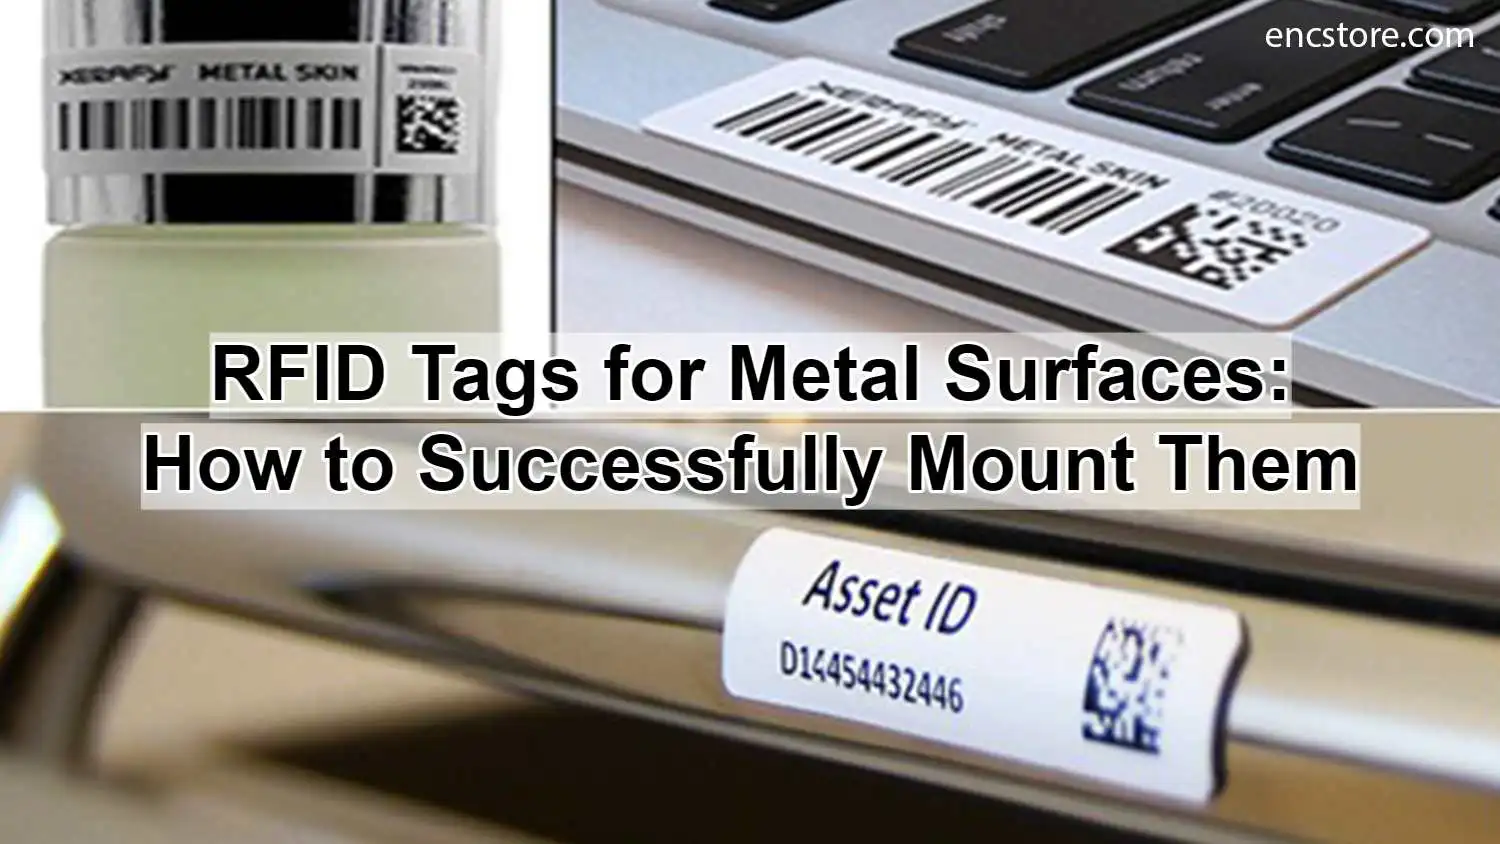 RFID Tags for Metal Surfaces